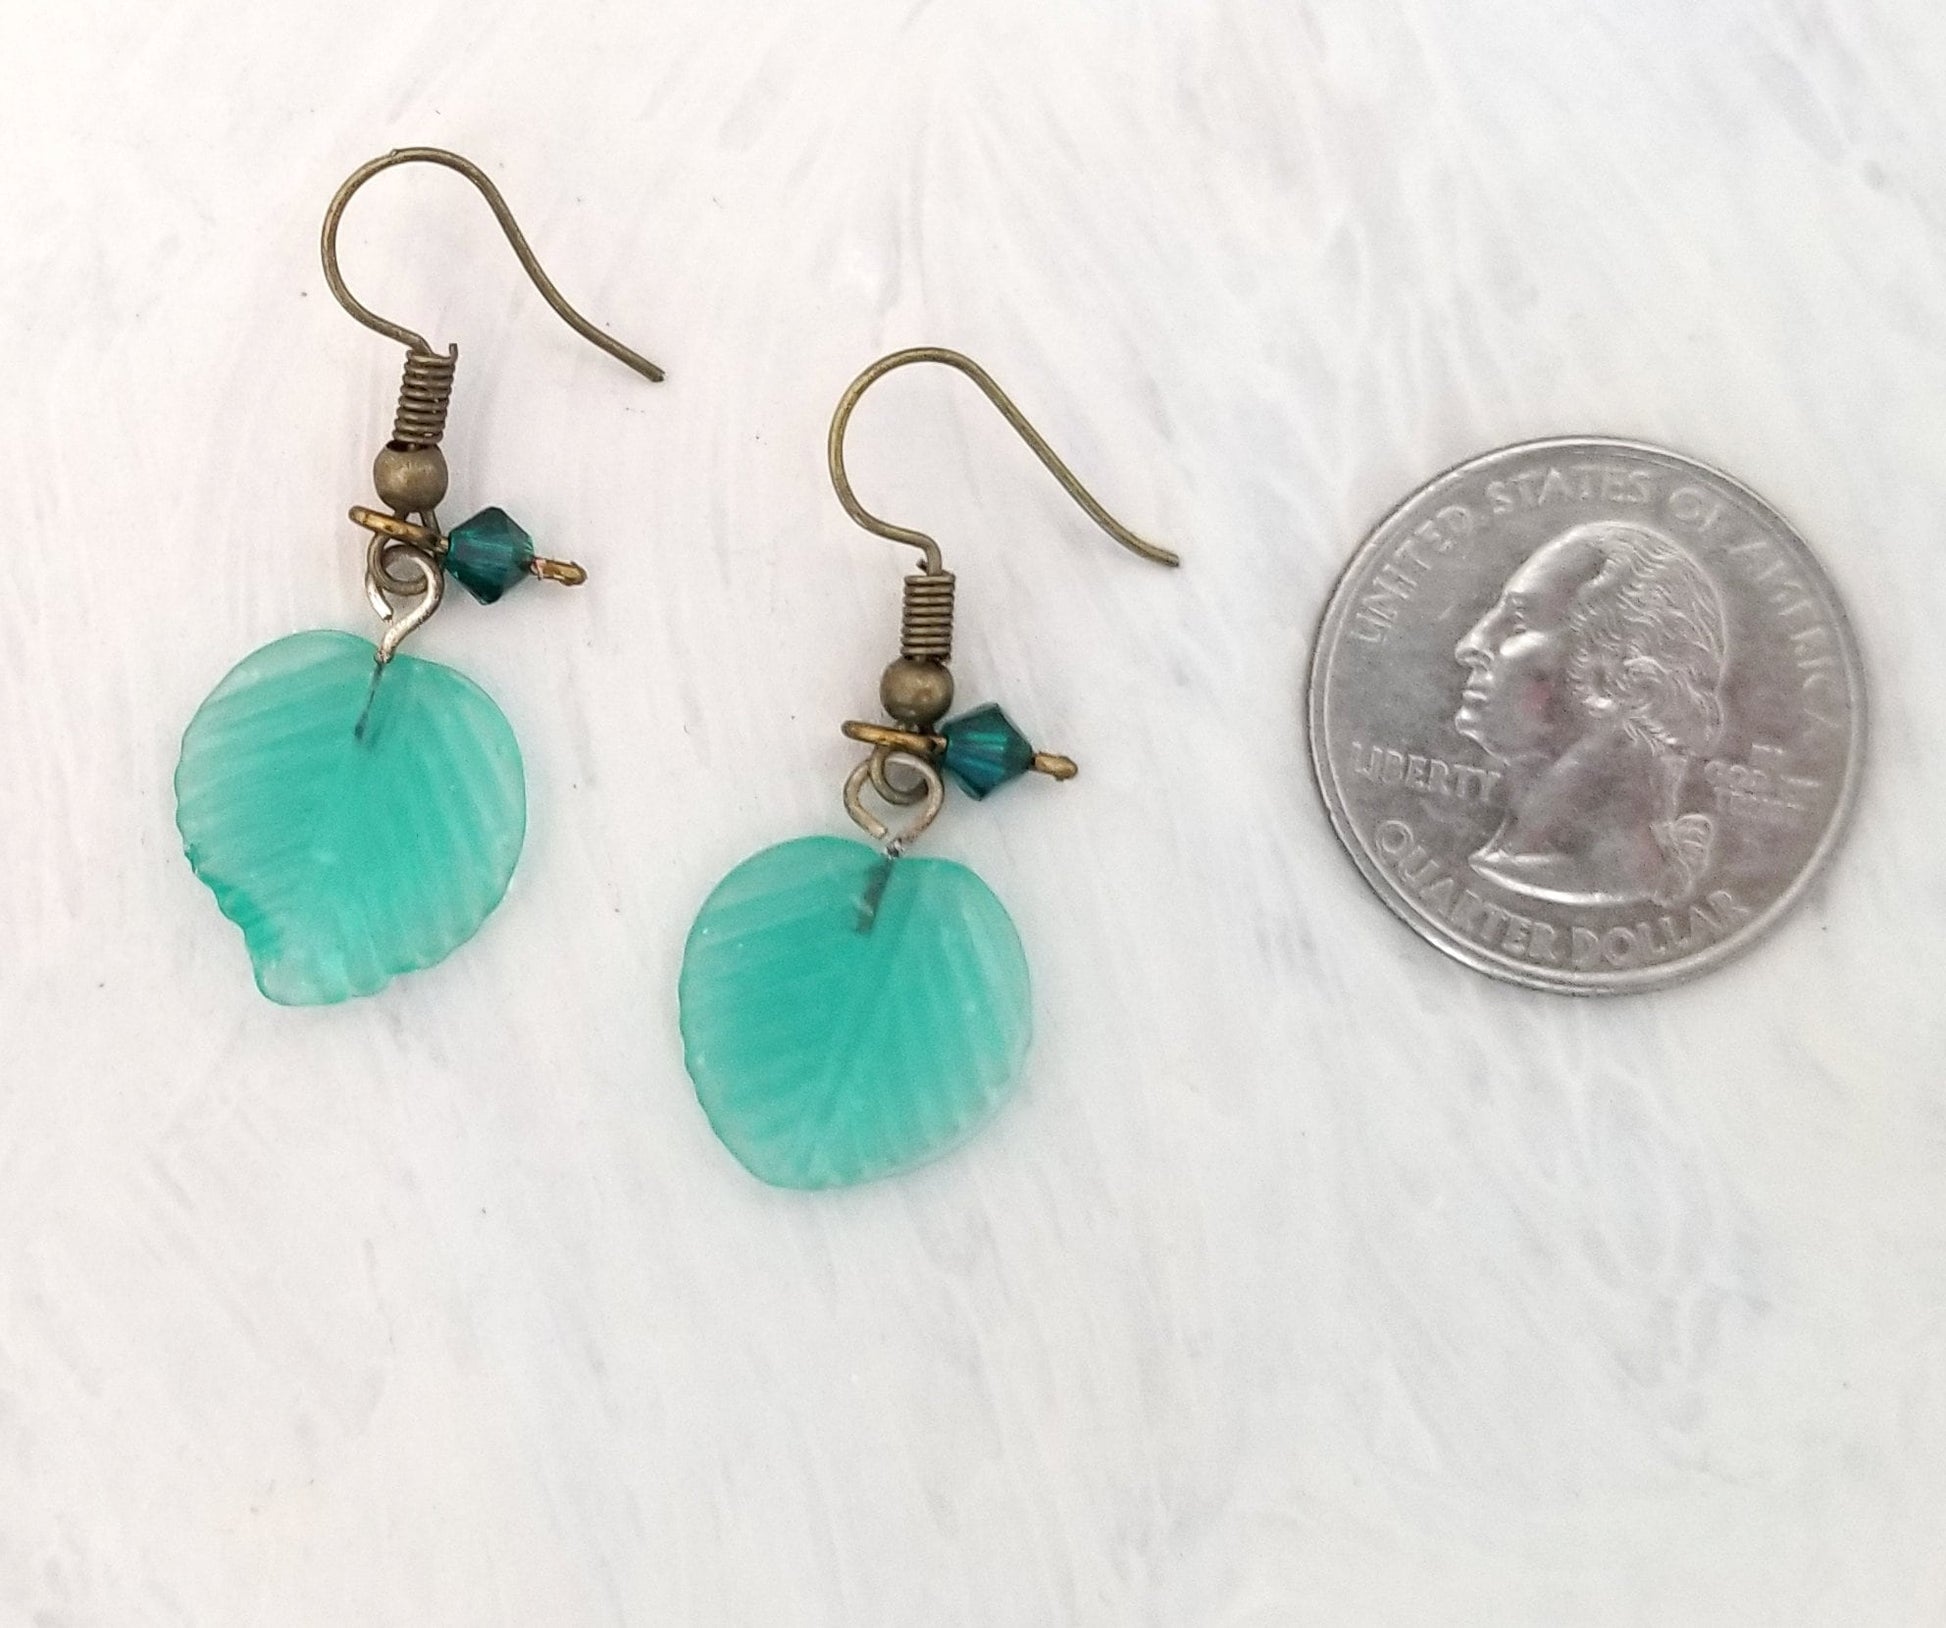 Medium Glass Leaf Earrings in Frosted Aqua Sea Blue Green, Wedding, Bridesmaid, Art Nouveau, Renaissance, Forest, Choice of Closure Types